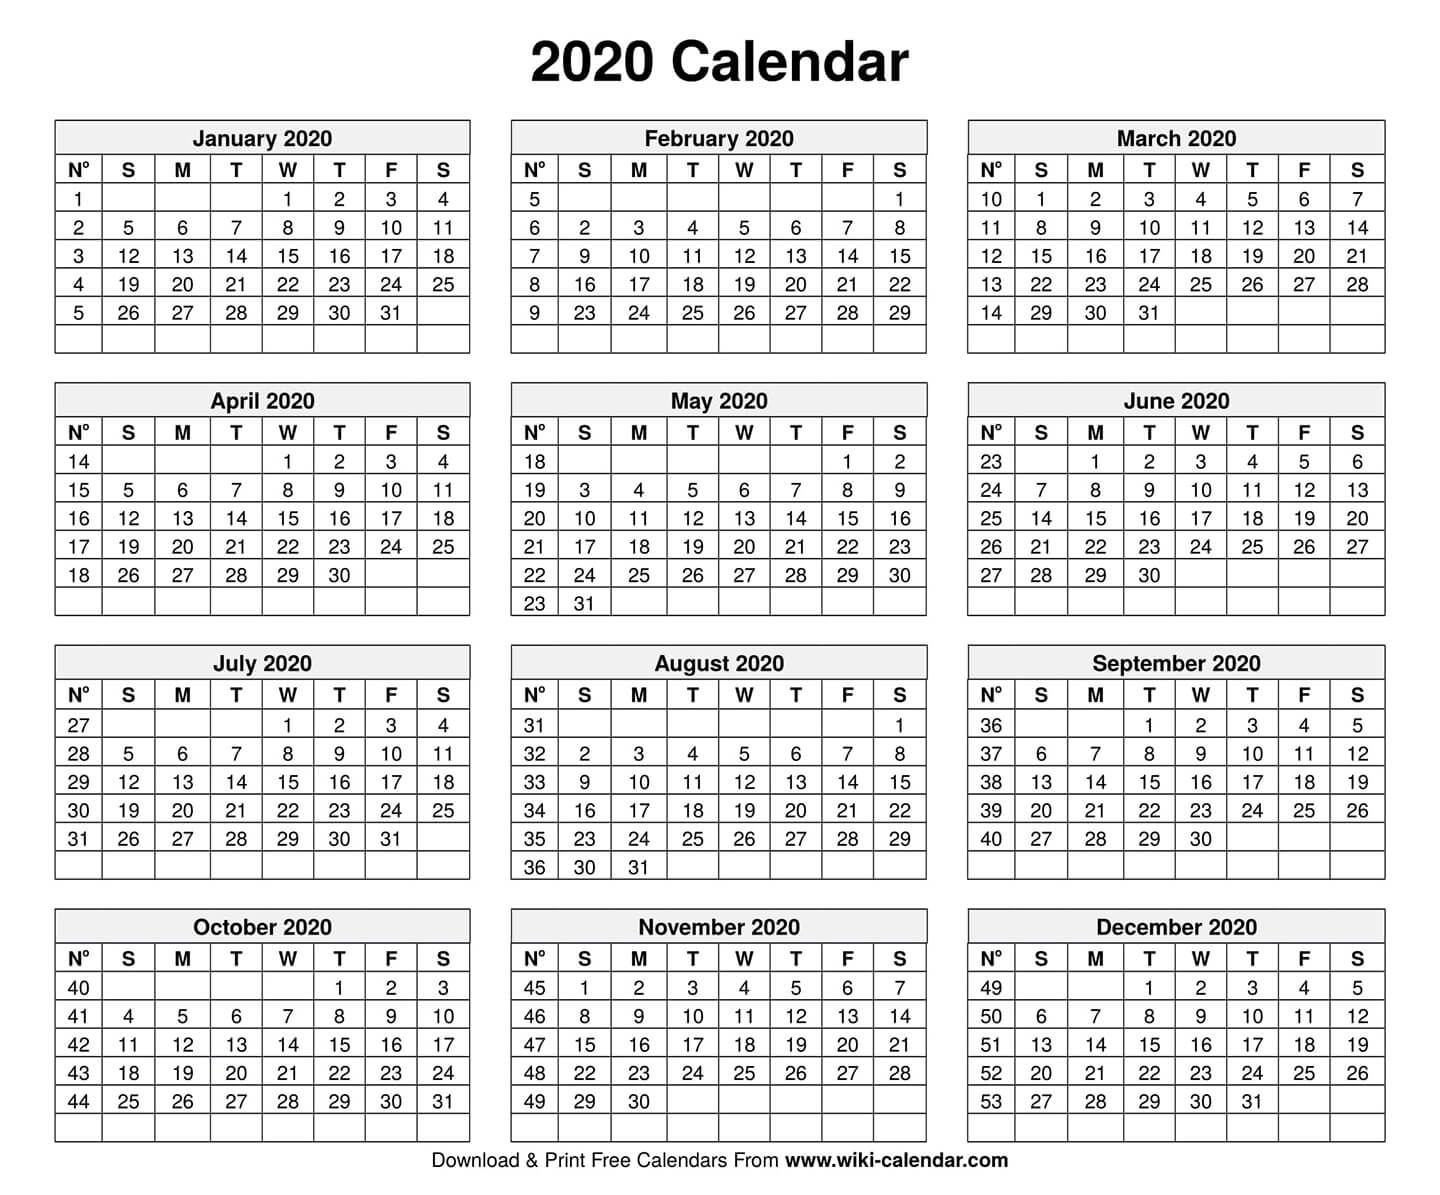 2020 Calendar Printable With Numbered Days | Monthly 2020 Calendar With Days Numbered